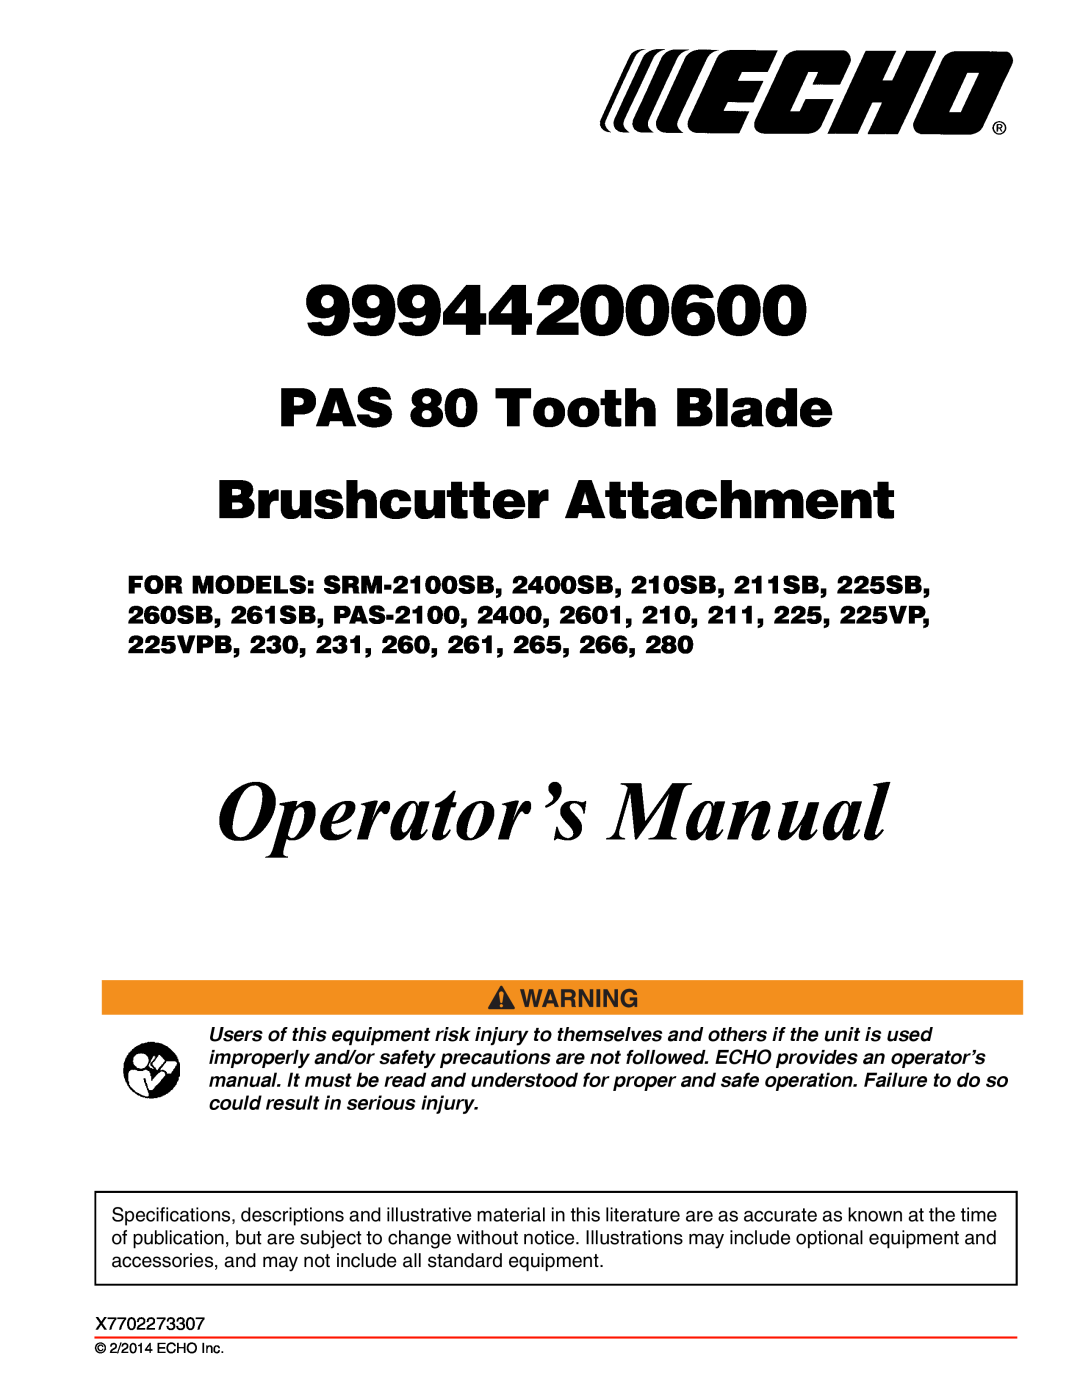 Echo 261, 260, 231, SRM-2100SB, 2400 specifications Operator’s Manual, 99944200600, PAS 80 Tooth Blade Brushcutter Attachment 